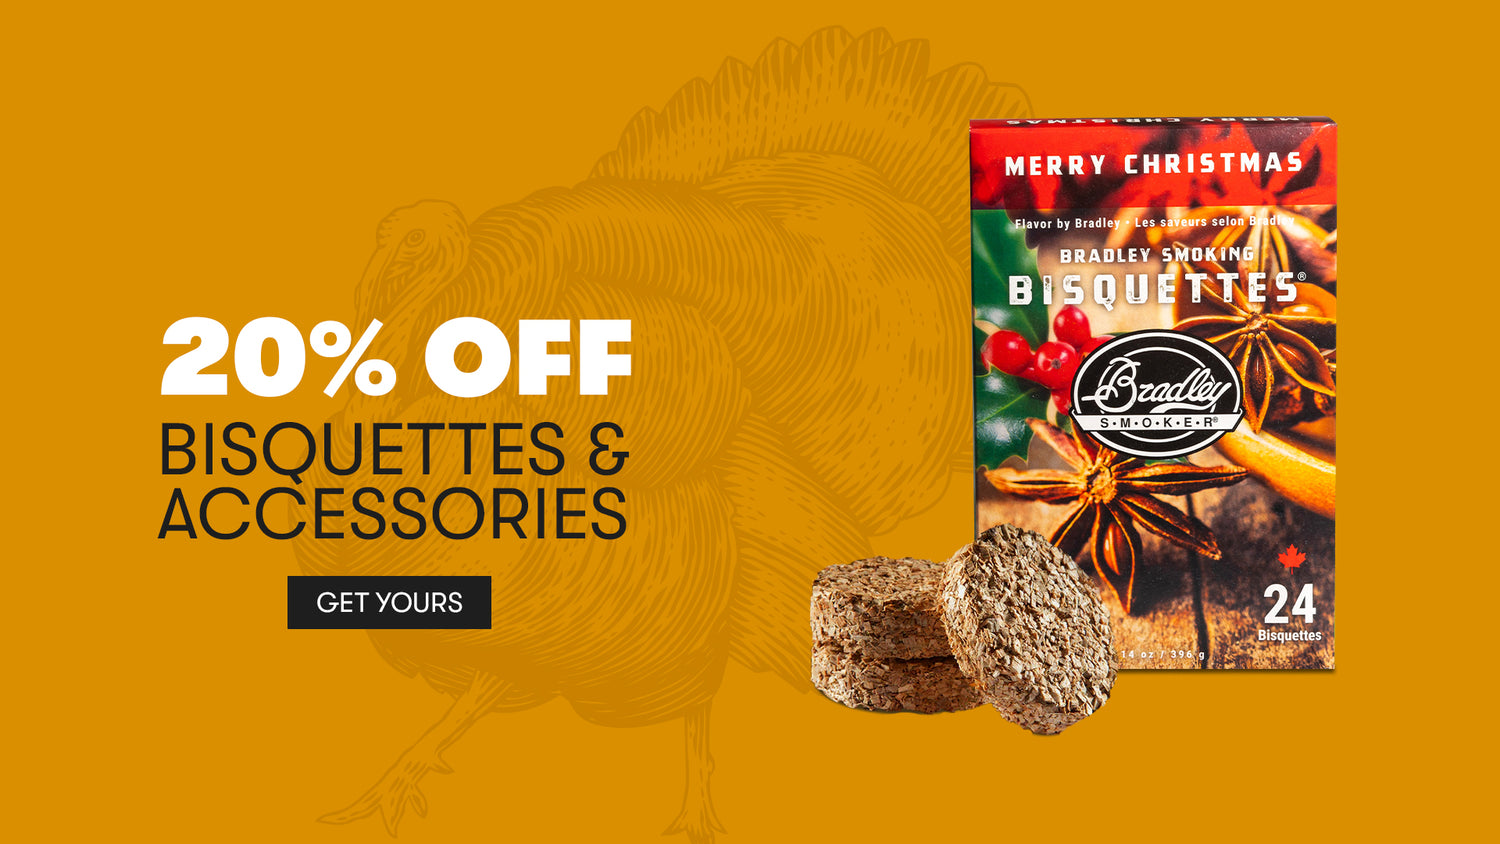 Black Friday Sale - SAT and SUN Only - 20% off bisquettes & accessories
*Sale applies to orders on bradleysmoker.ca